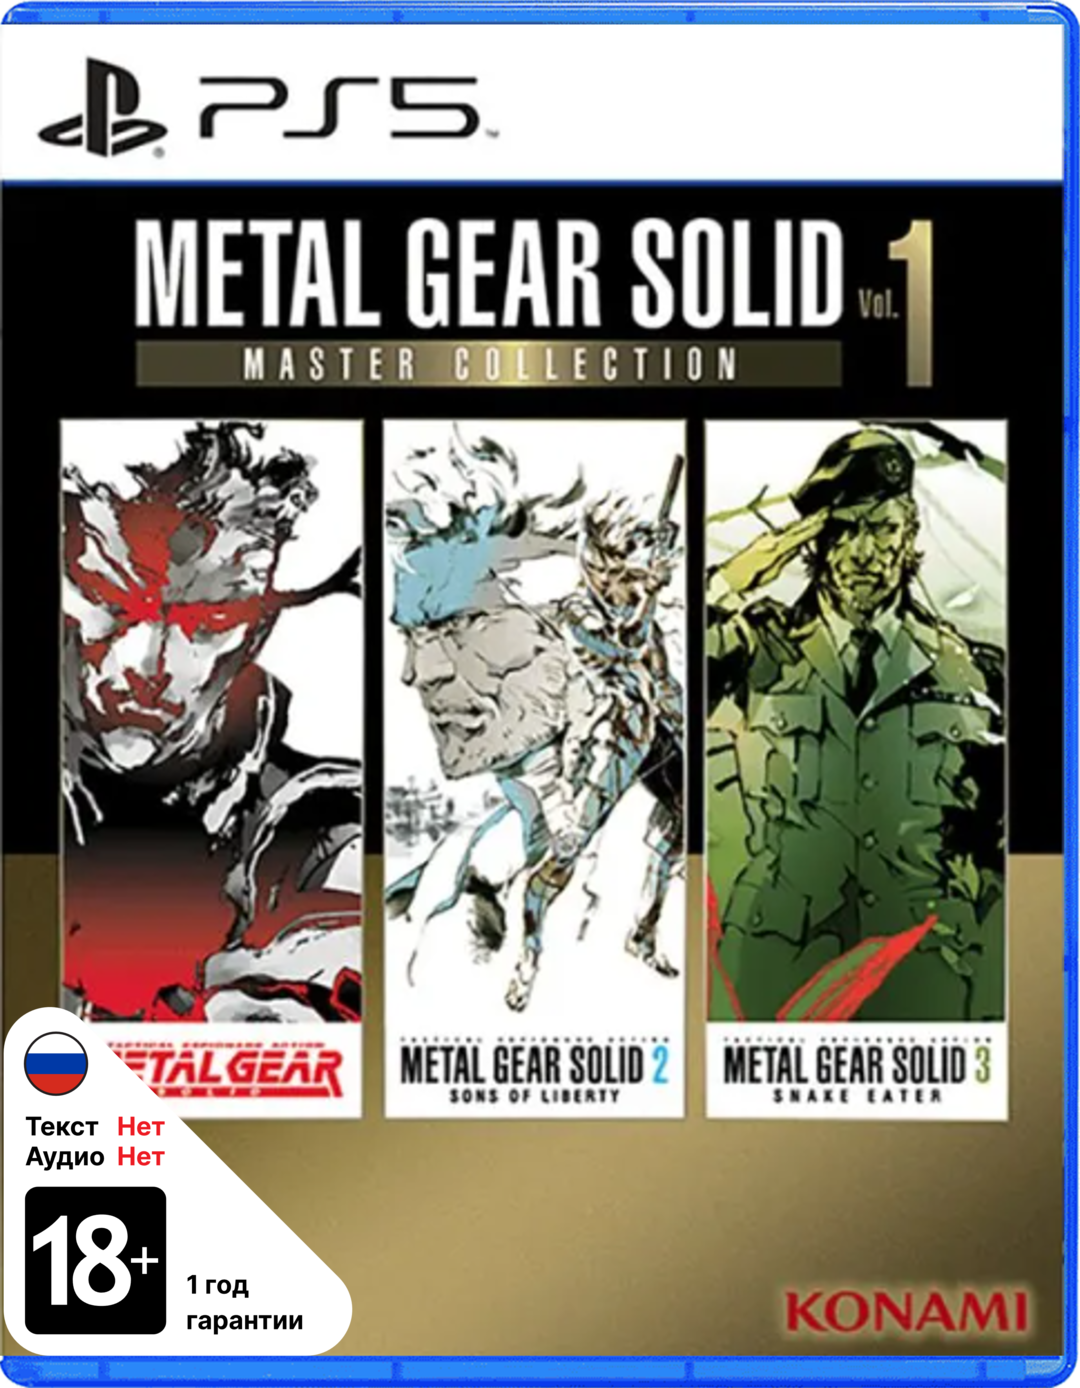 Metal Gear Solid: Master Collection Vol. 1 [PS5]